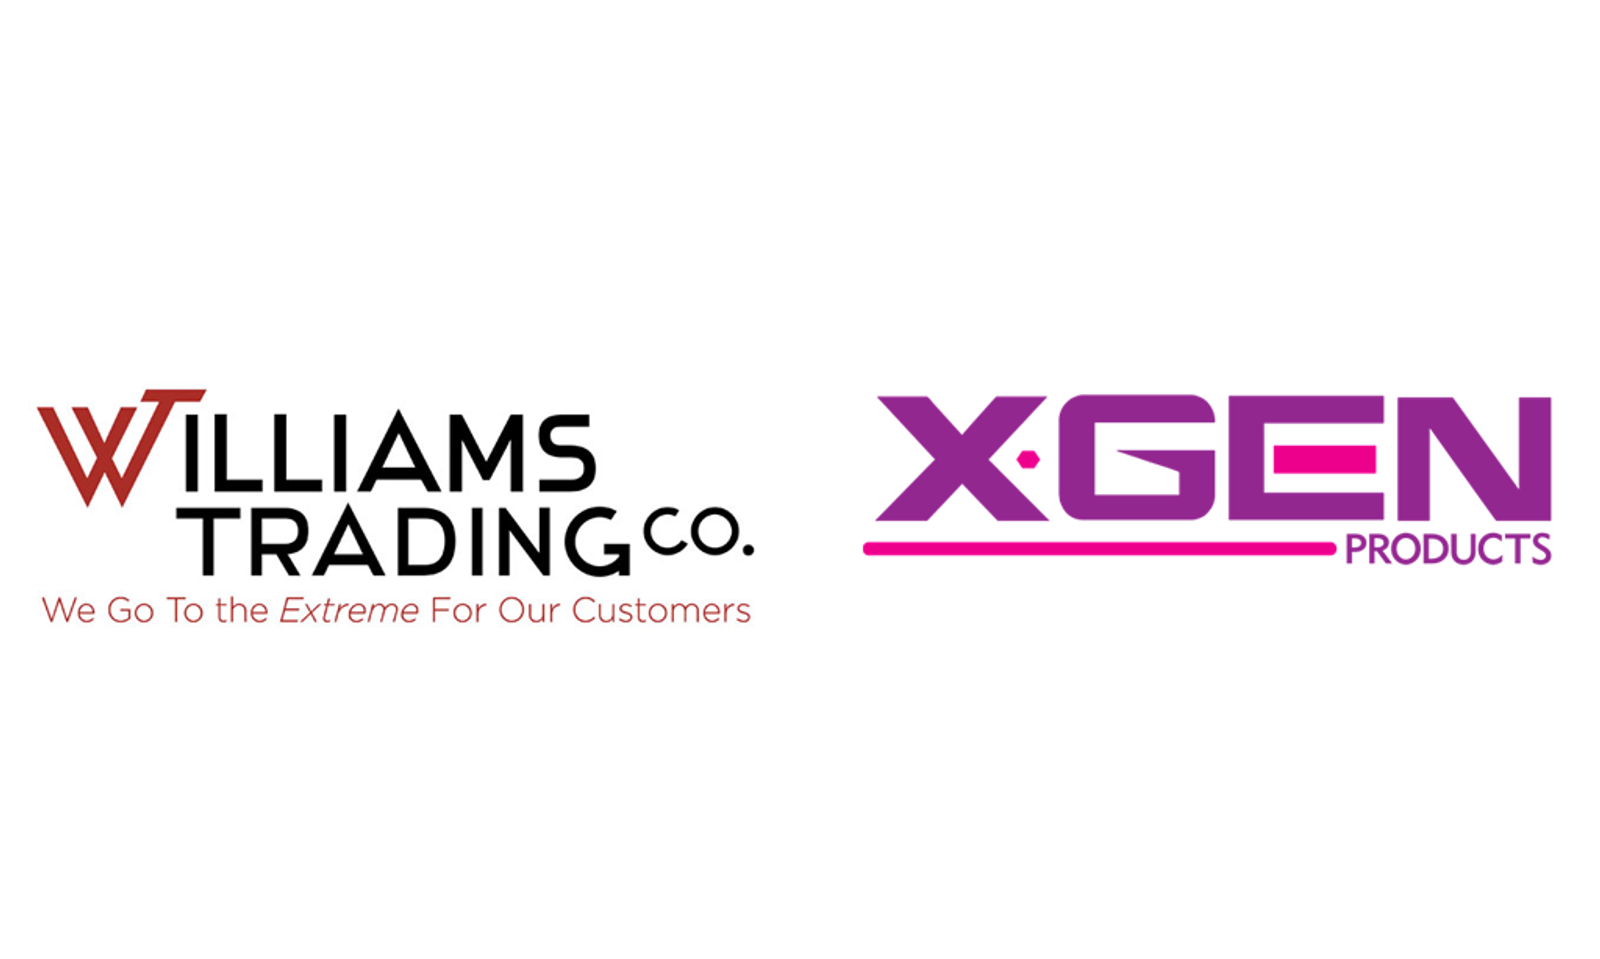 Williams Trading Co. Now Carries Teacher's Pet by Xgen Products